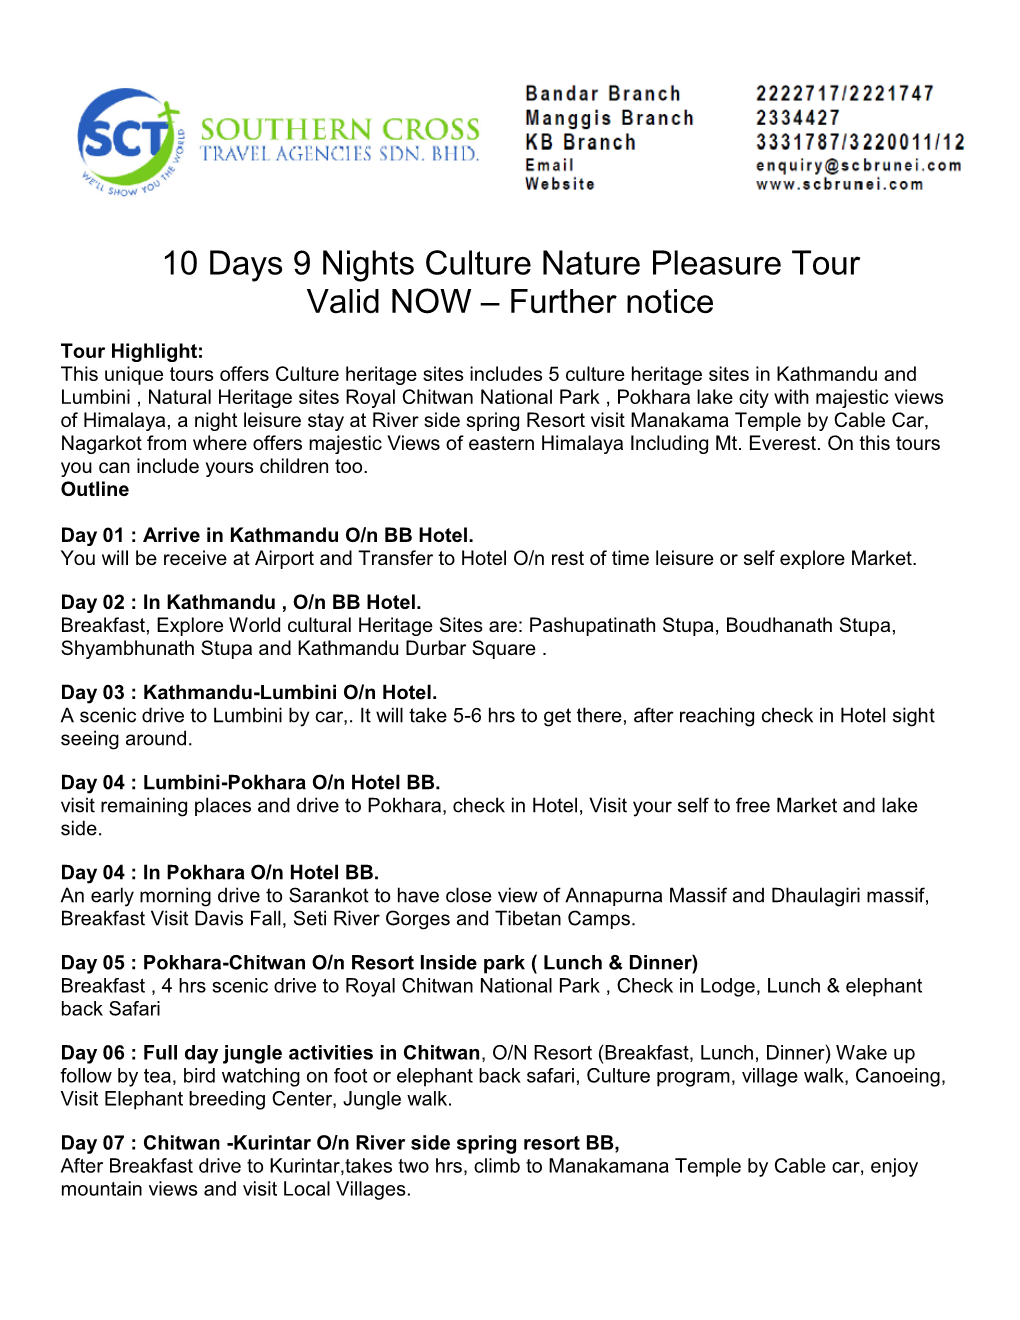 10 Days 9 Nights Culture Nature Pleasure Tour Valid NOW – Further Notice